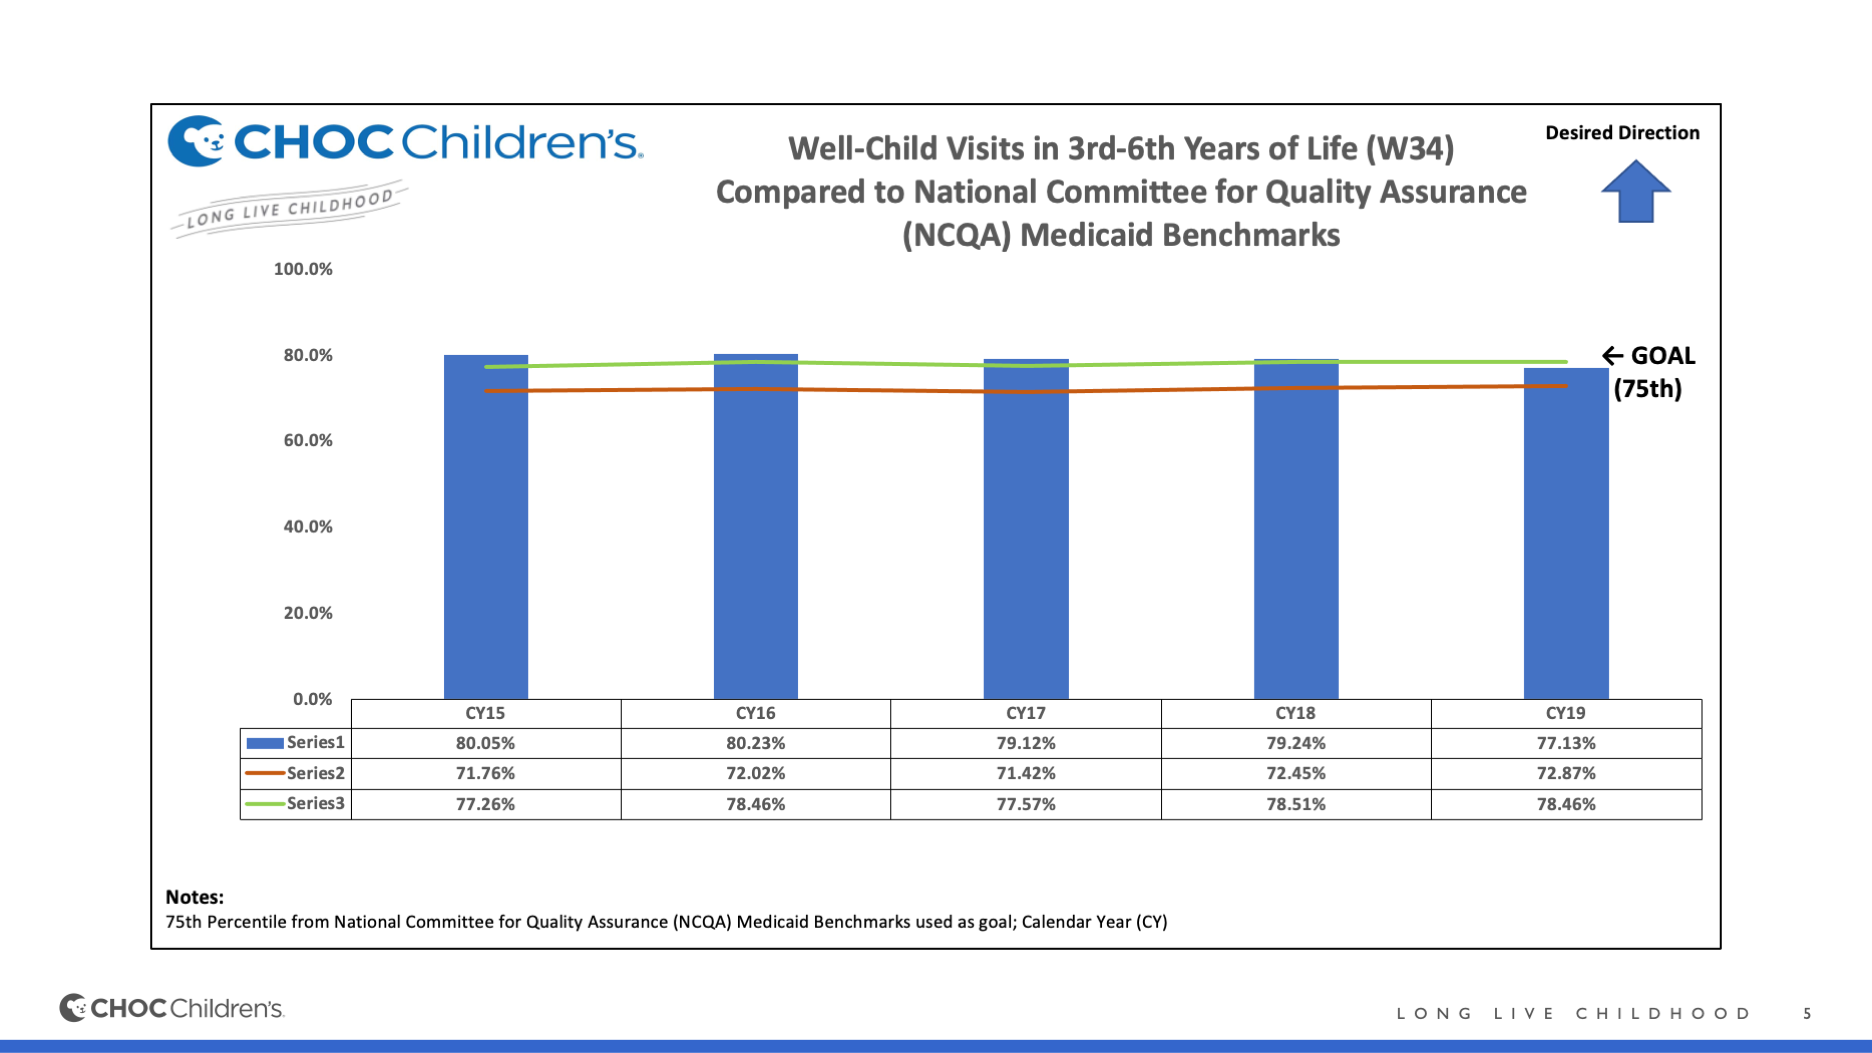 how much do well child visits cost